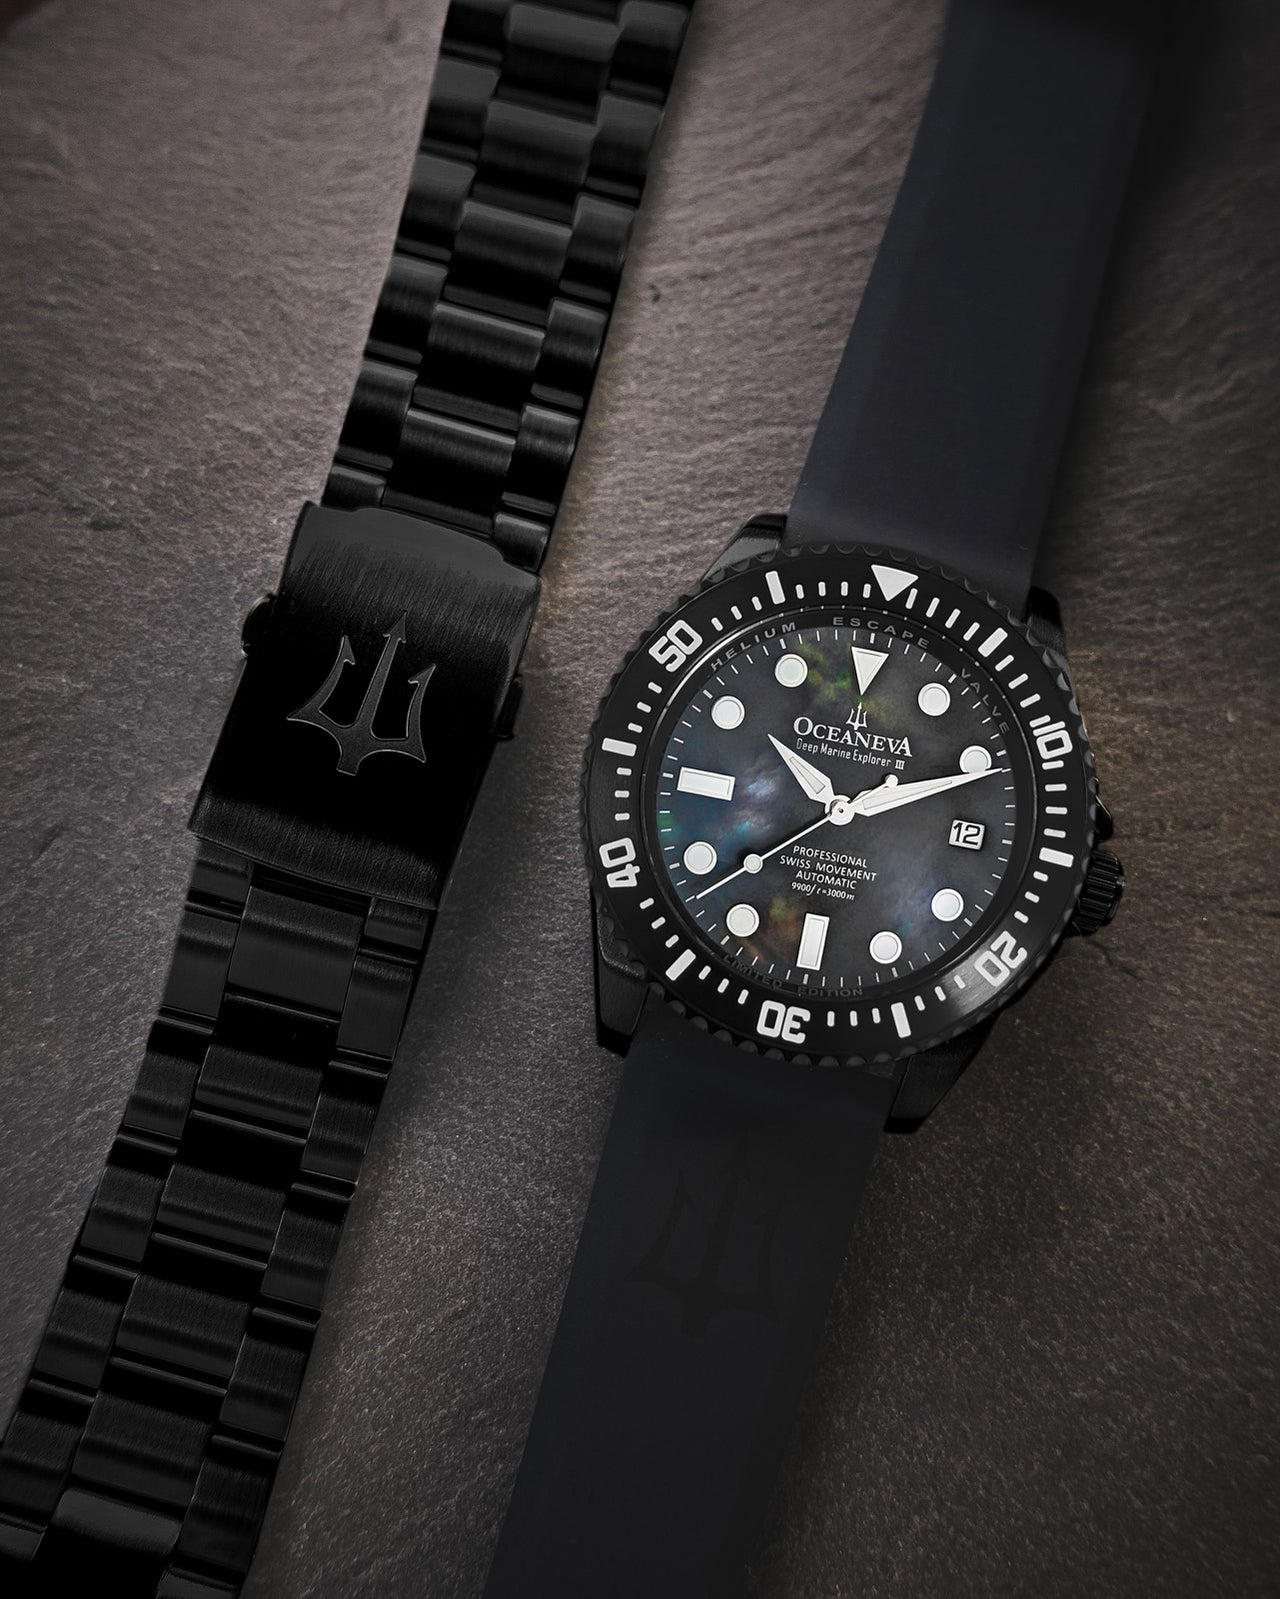 Oceaneva 3000M Dive Watch Gun Metal Gray Mother of Pearl Front Pictured With Rubber Strap